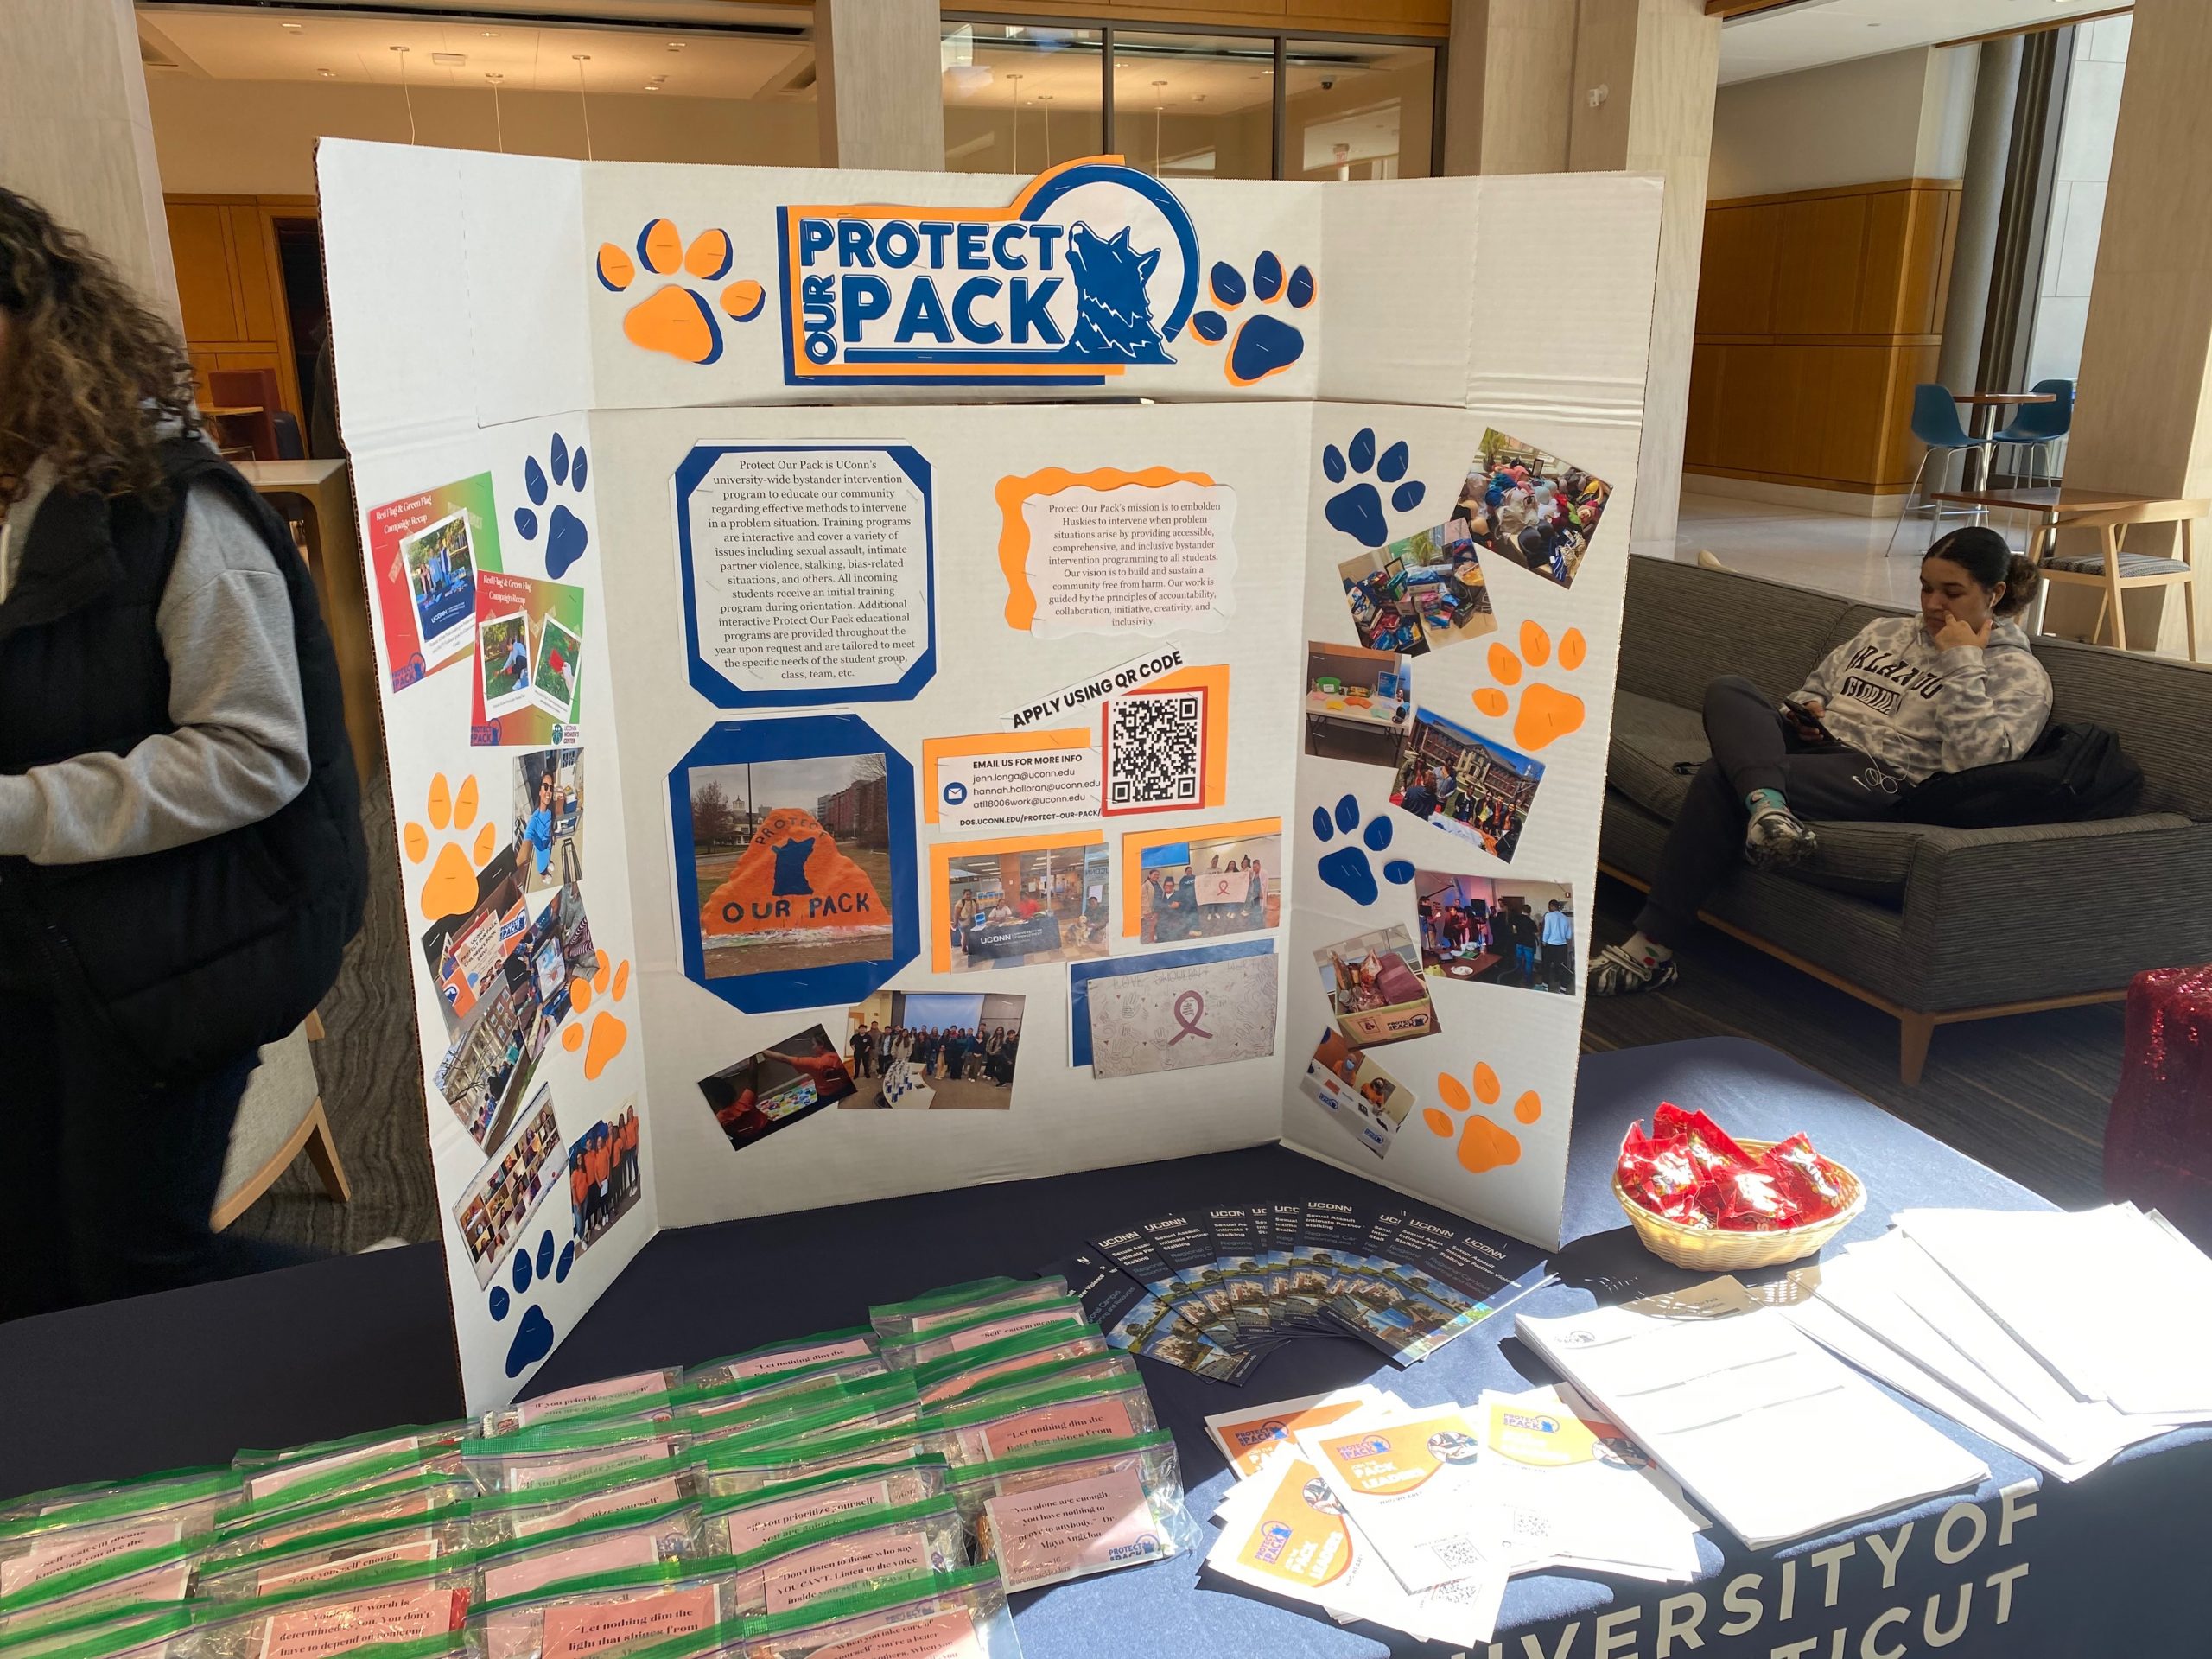 Protect Our Pack poster with information about programming